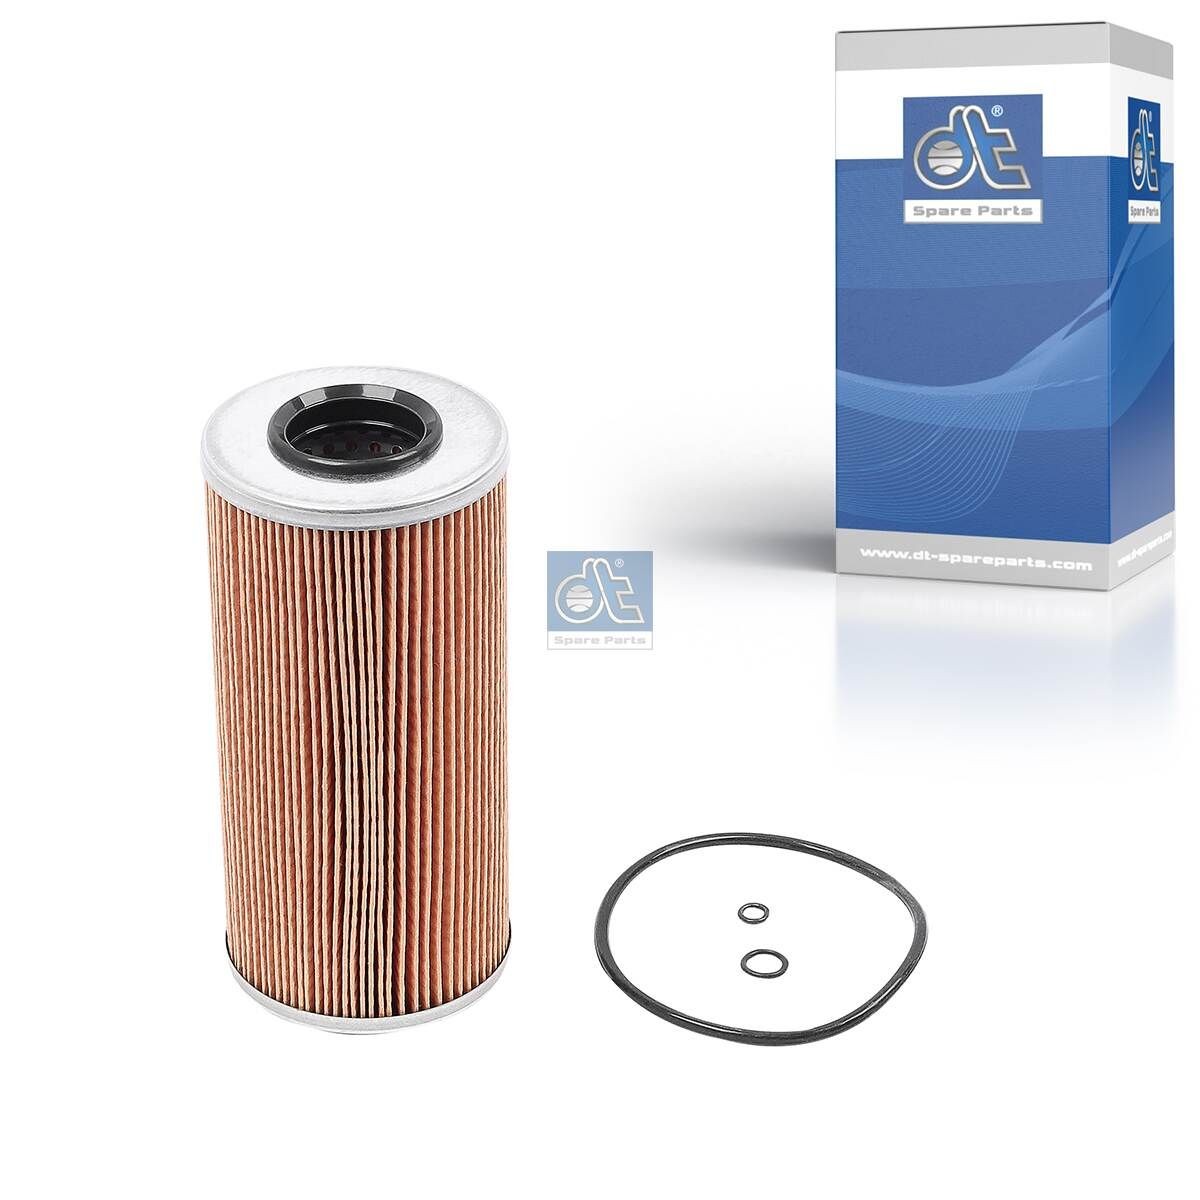 HU 951 x DT Spare Parts 3.14108 Oil filter 51.055040105